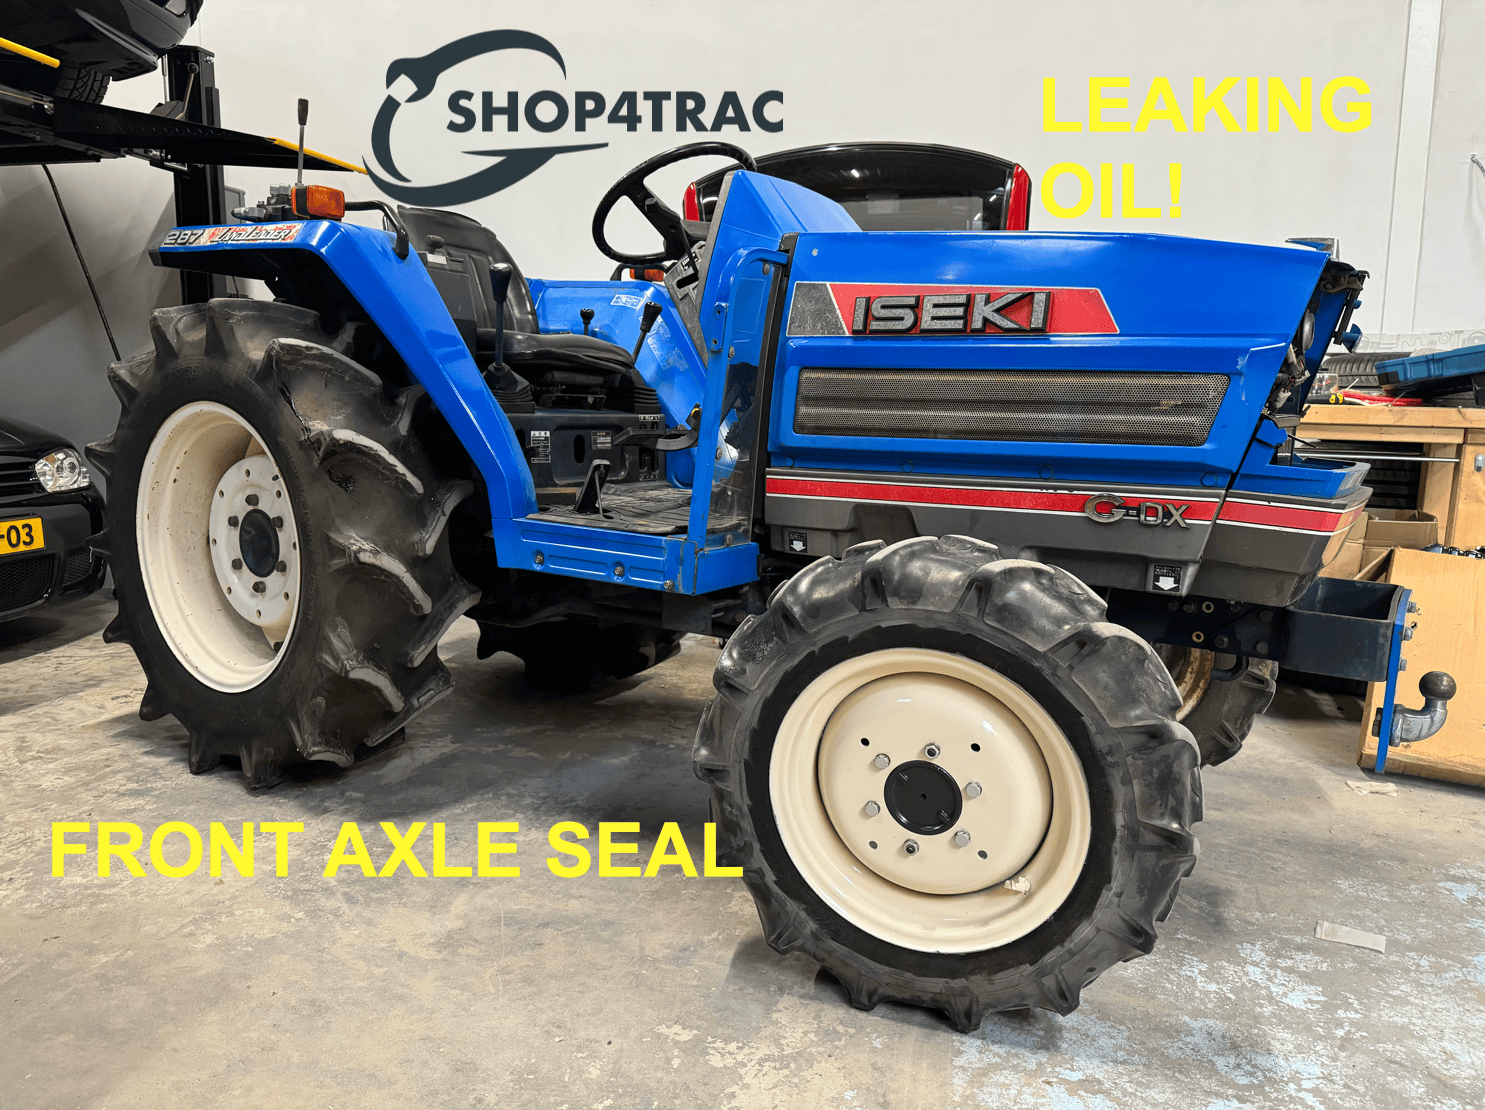 How to Replace a Front Axle Oil Seal - A Step-by-Step Guide for Every Mini Tractor | Shop4Trac